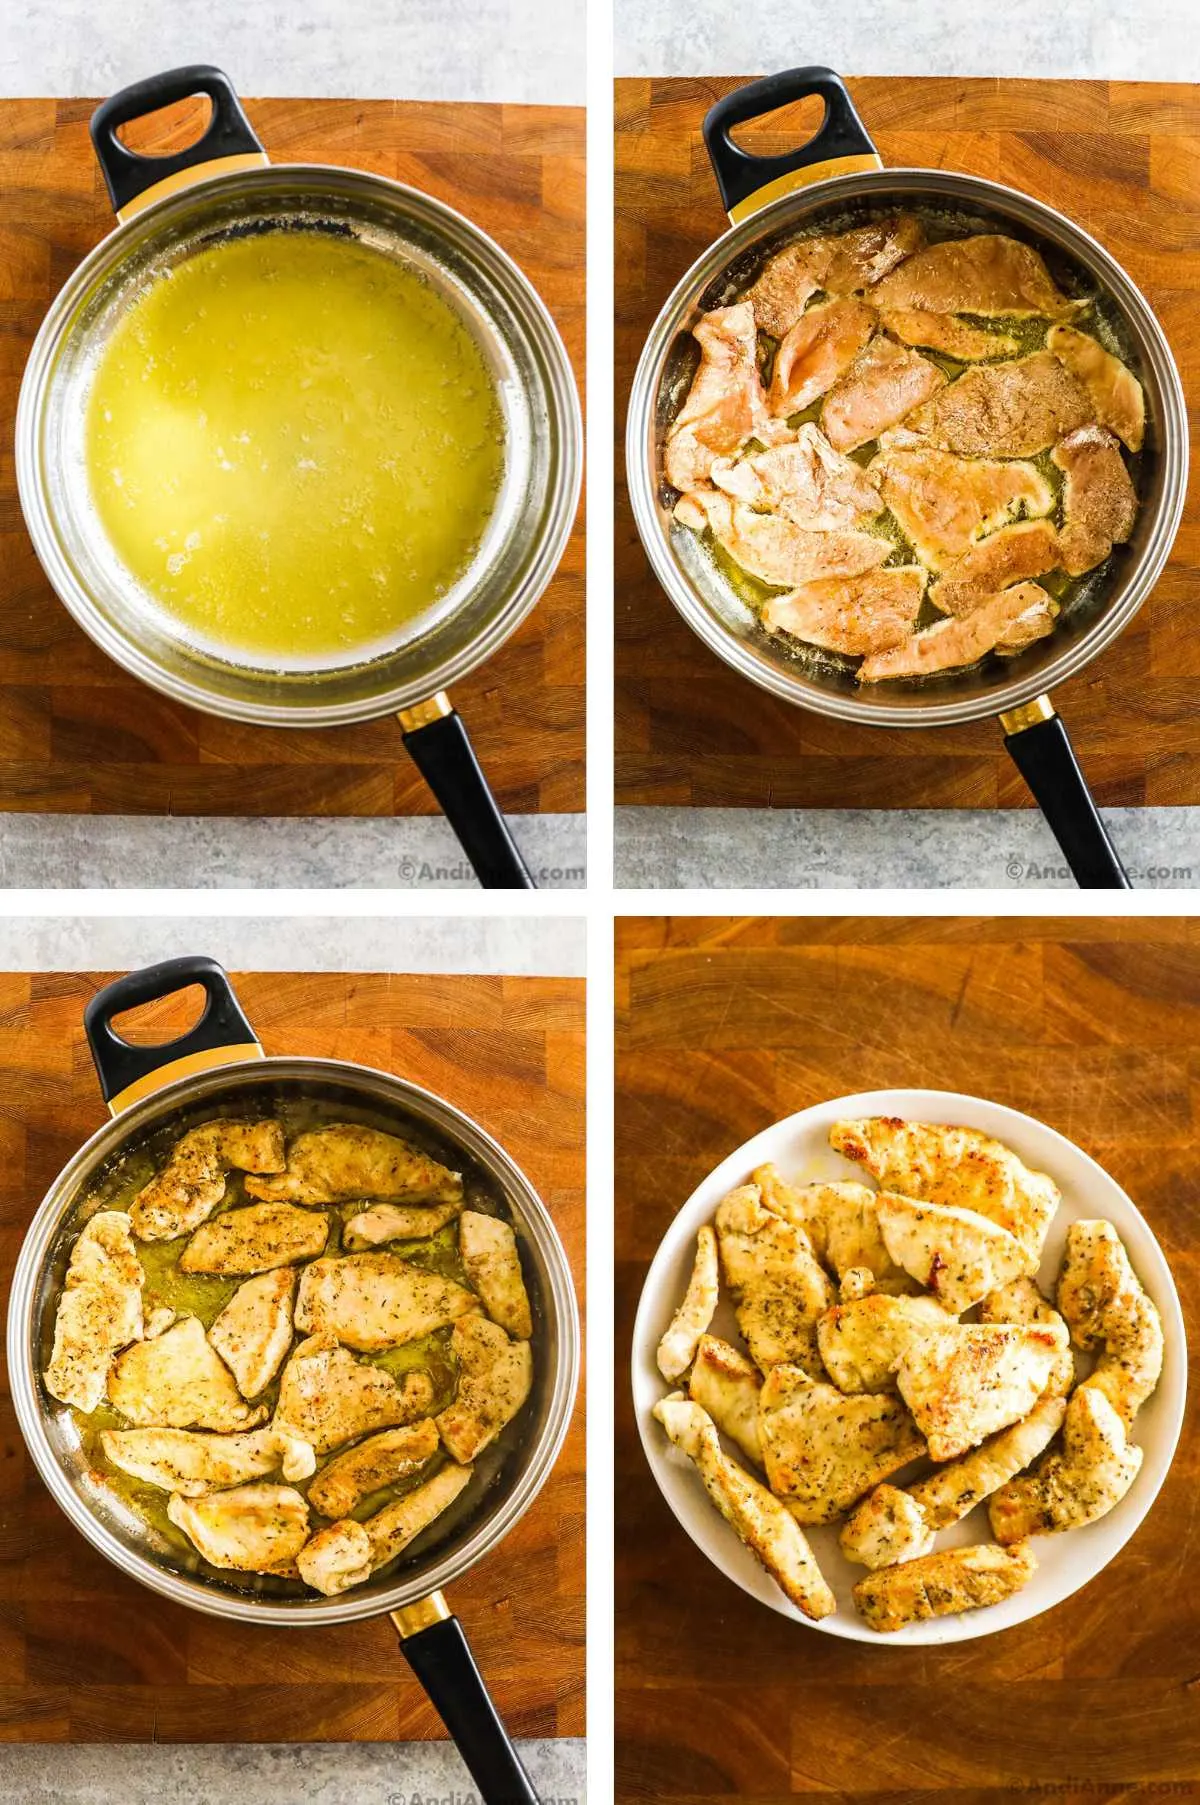 Four images in one: 1. Olive oil and butter heated and melted in a pan. 2. Side one of chicken strips is placed in pan. 3. Chicken is flipped to sear side two. 4. Chicken is placed on a white plate and set aside. 